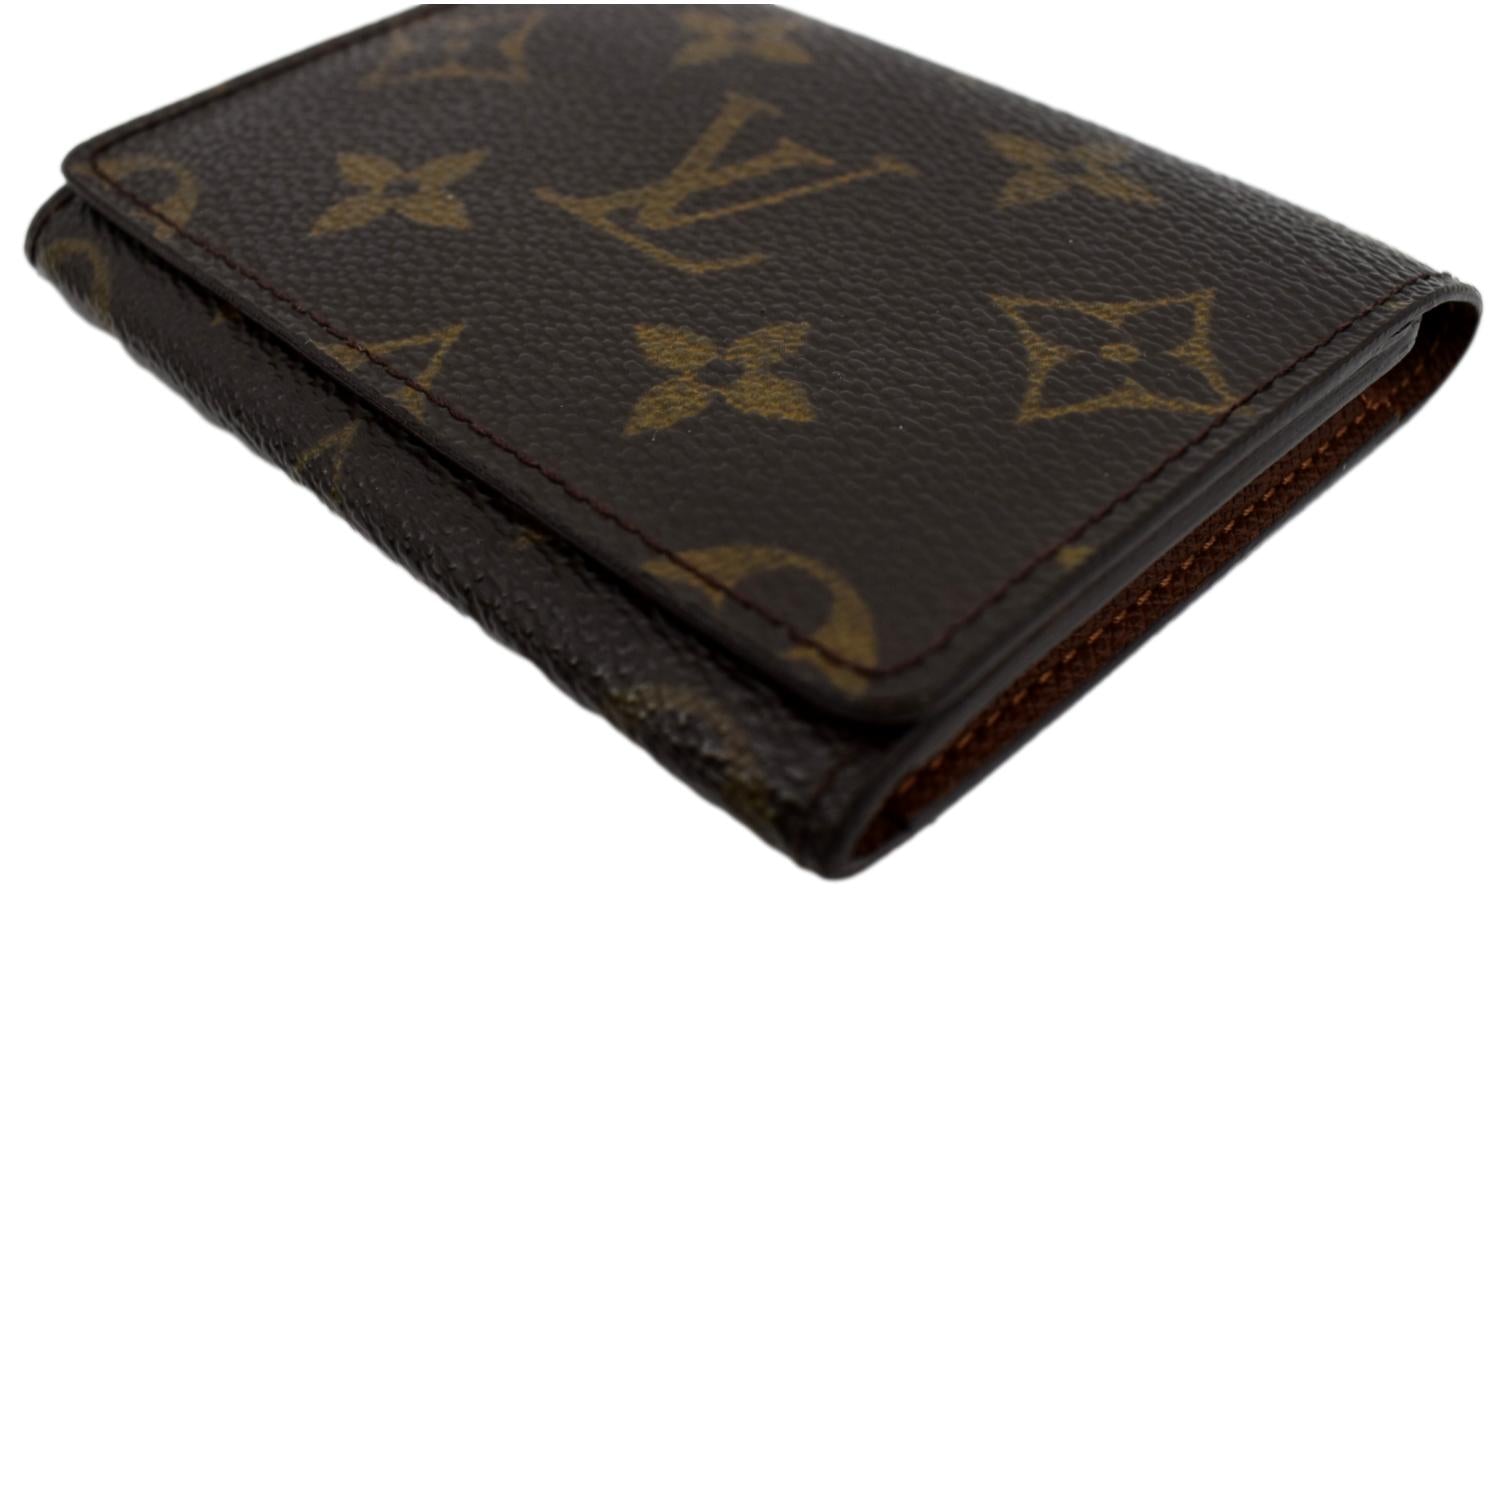 beautiful monogram louis vuitton mini card wallet holder OFFERS WELCOME!